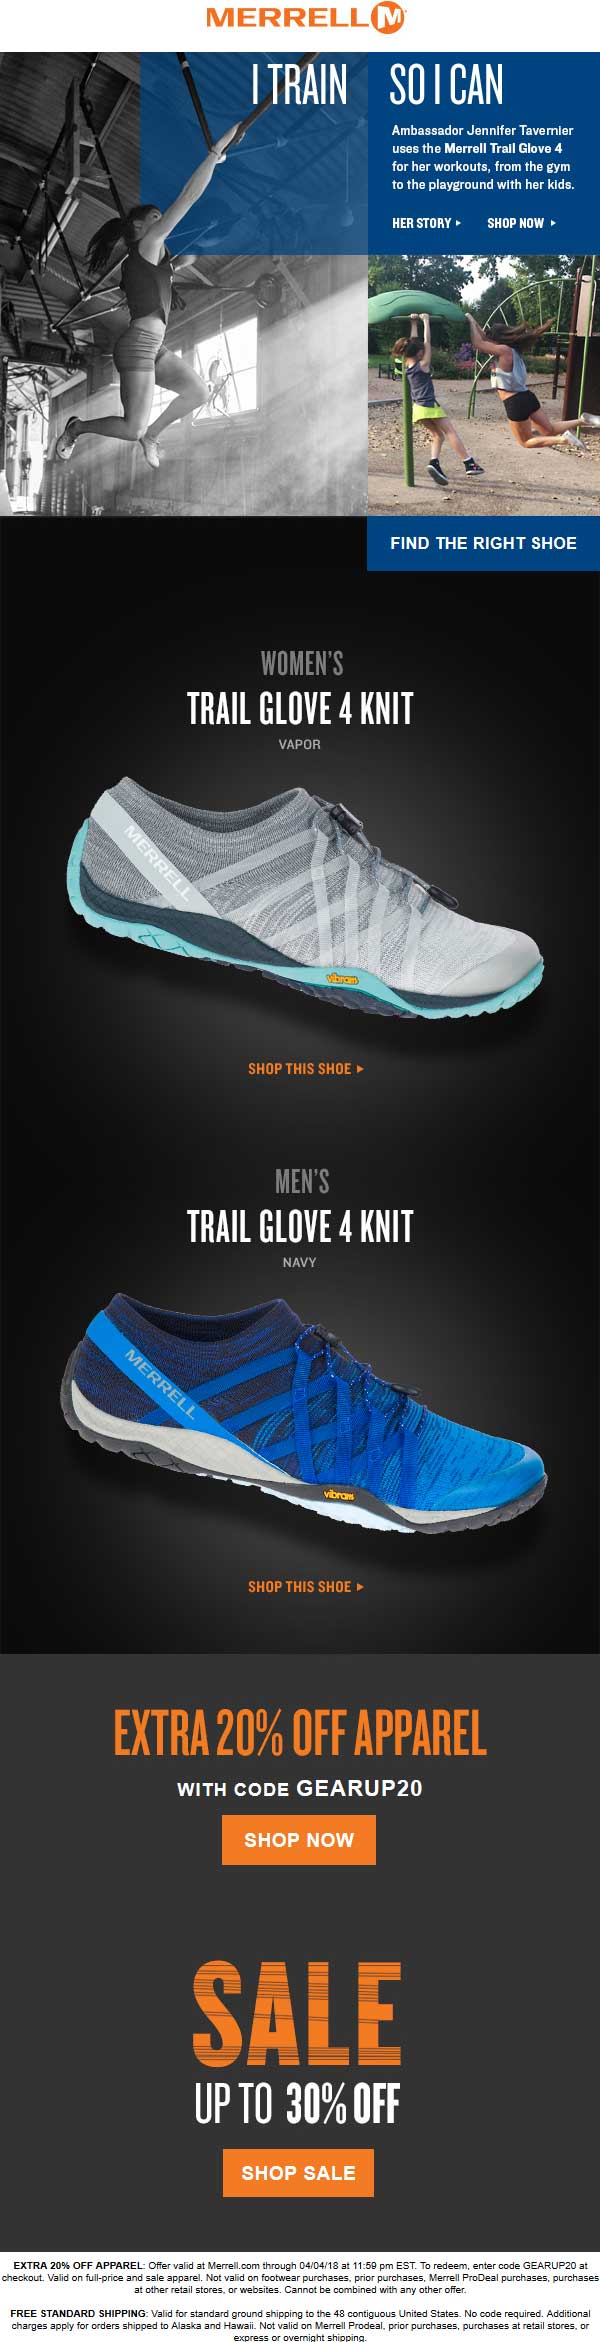 Merrell September 2020 Coupons and 